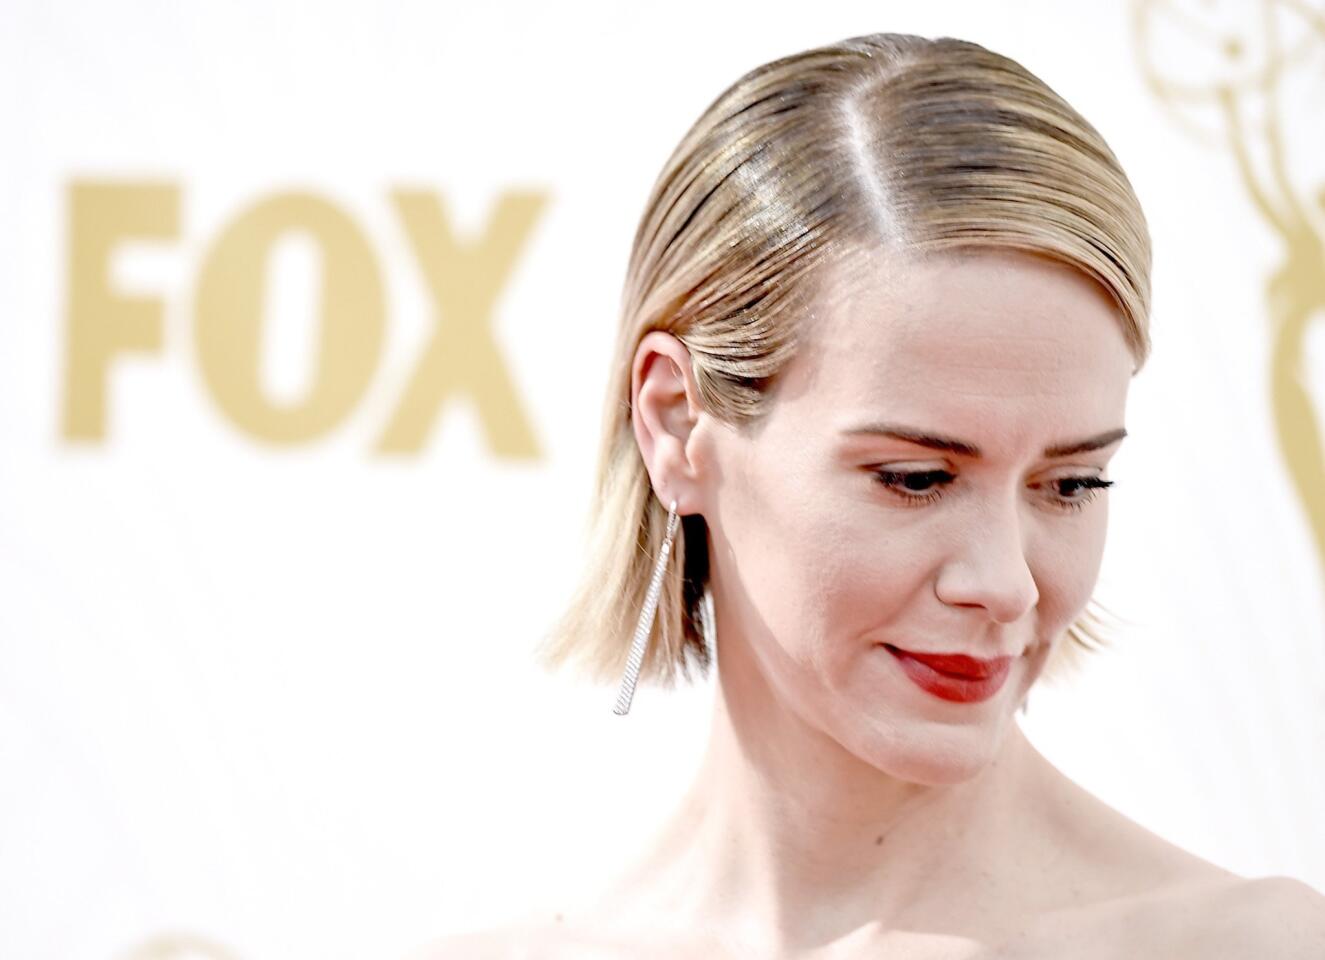 Sarah Paulson's slicked-back hair features a deep side part.